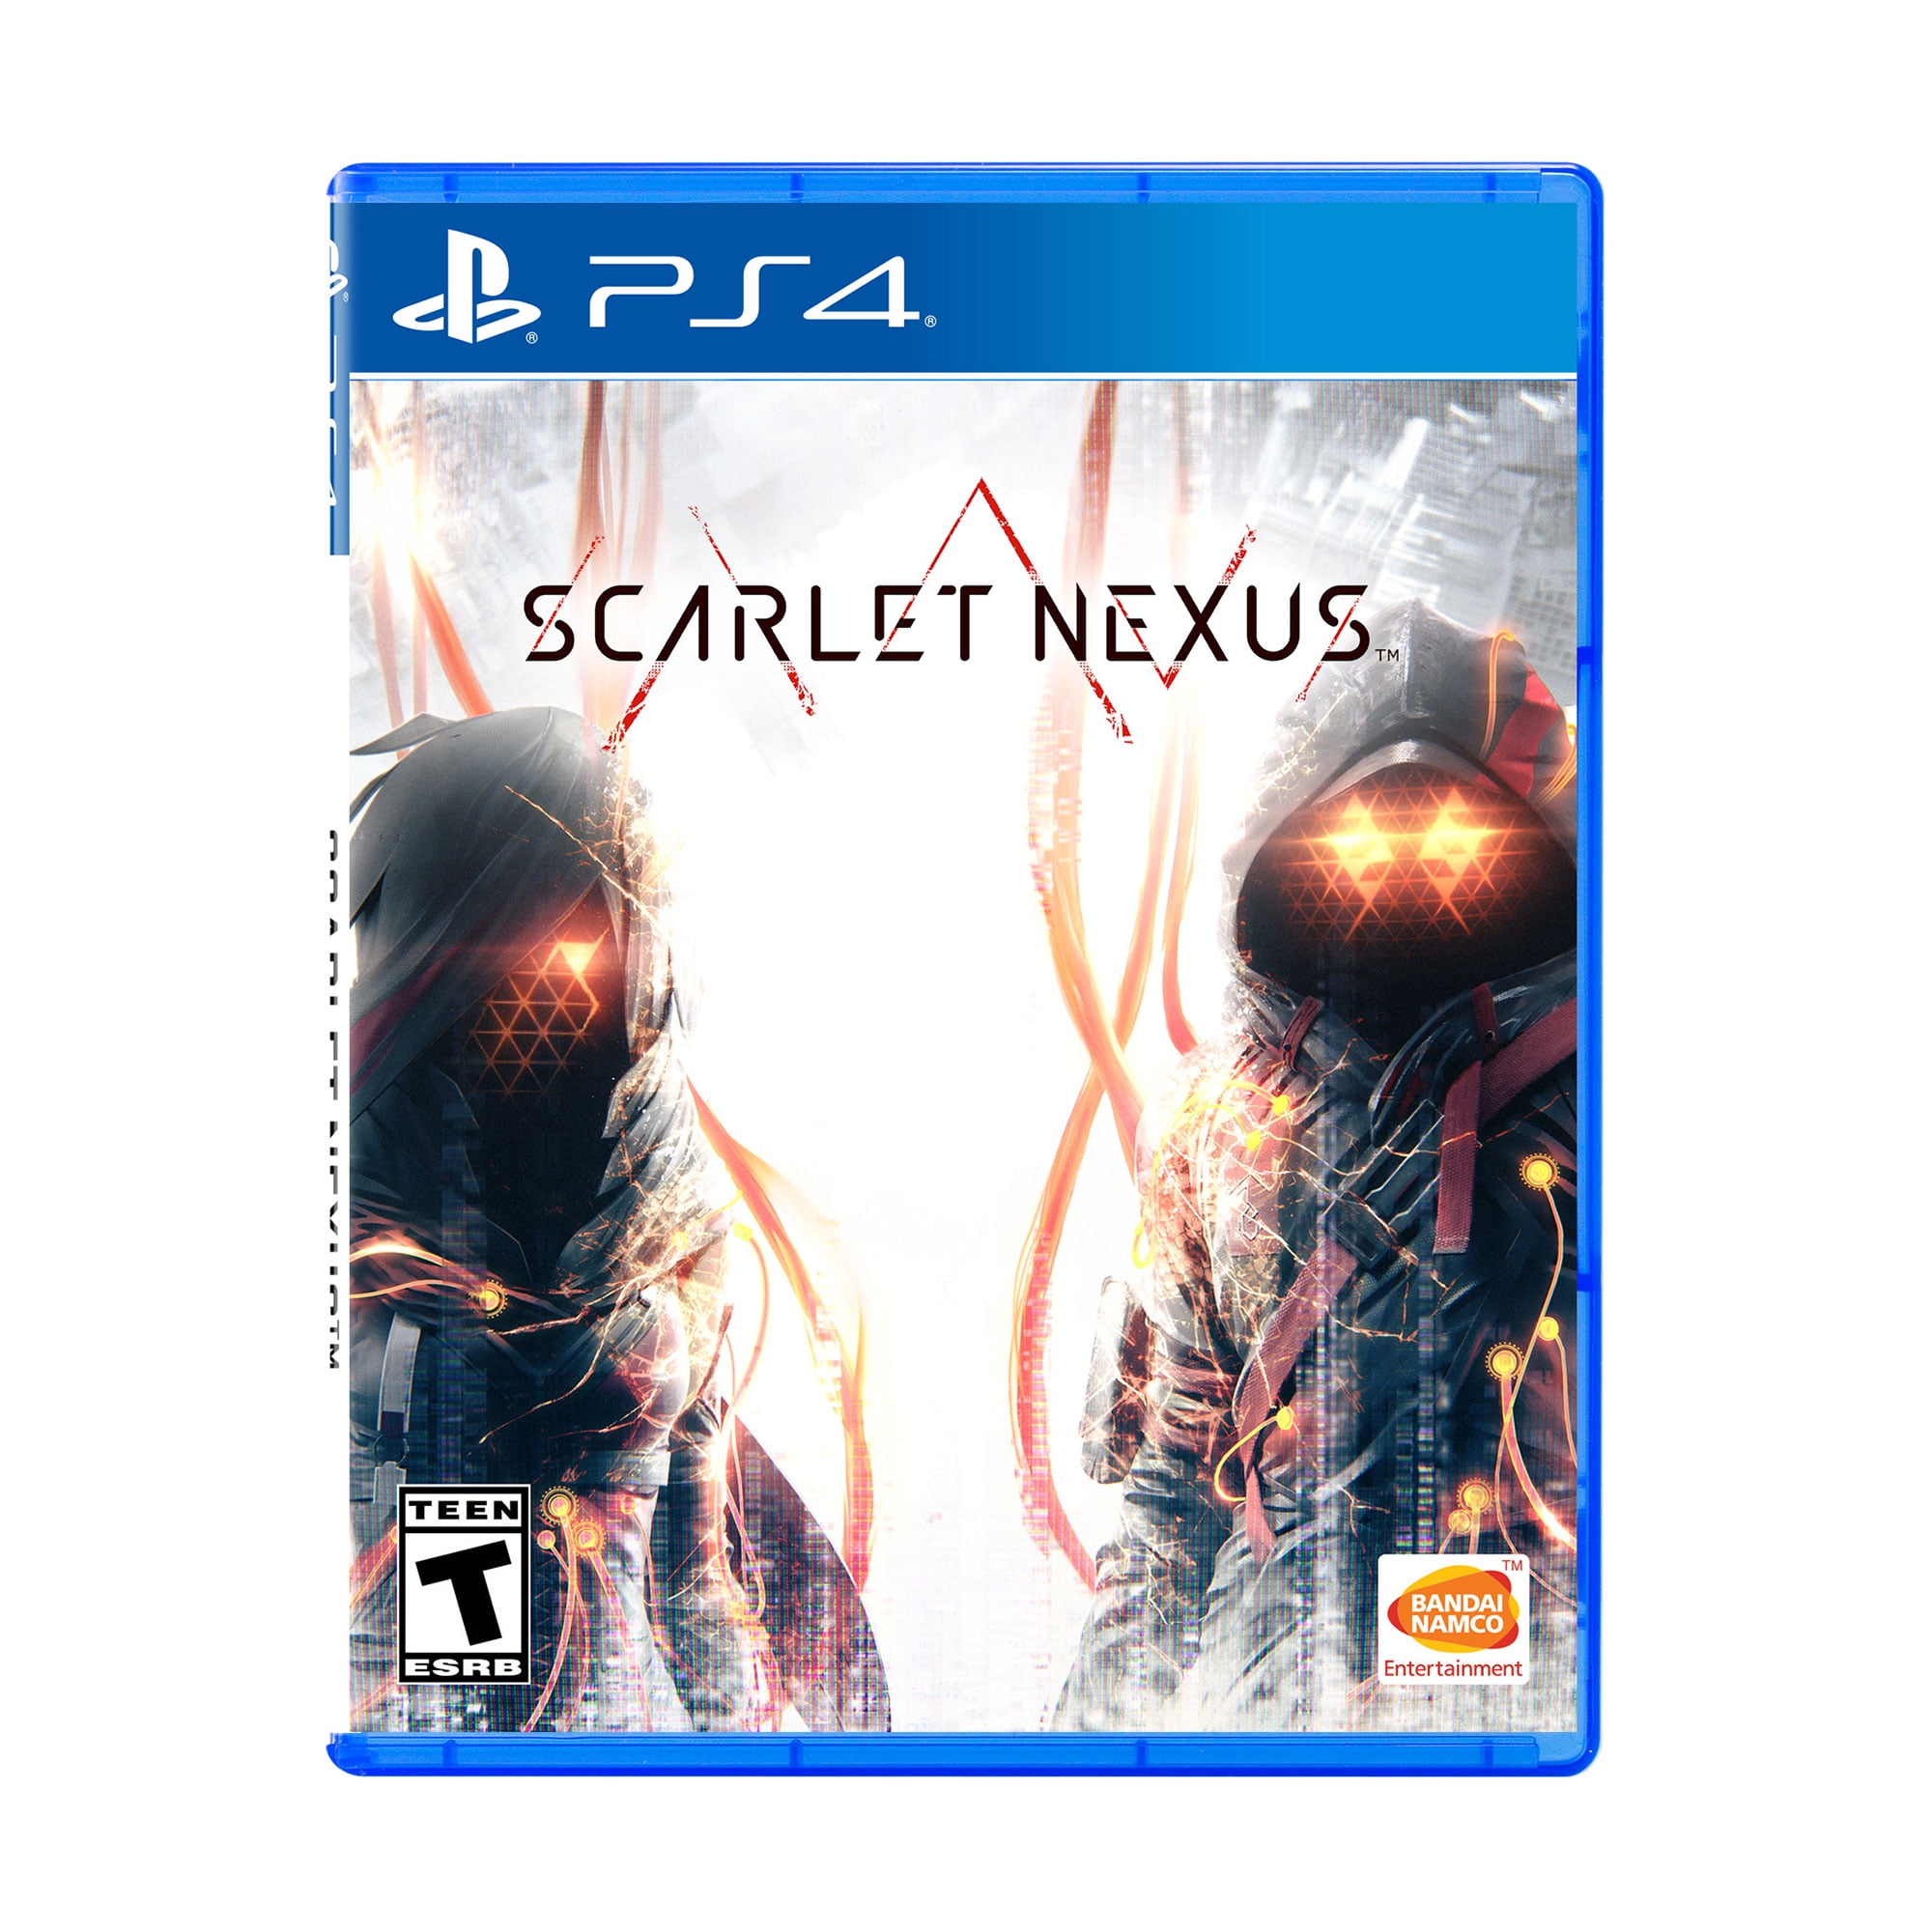 Scarlet Nexus Review (PS5)  The Makings Of A Cult Classic